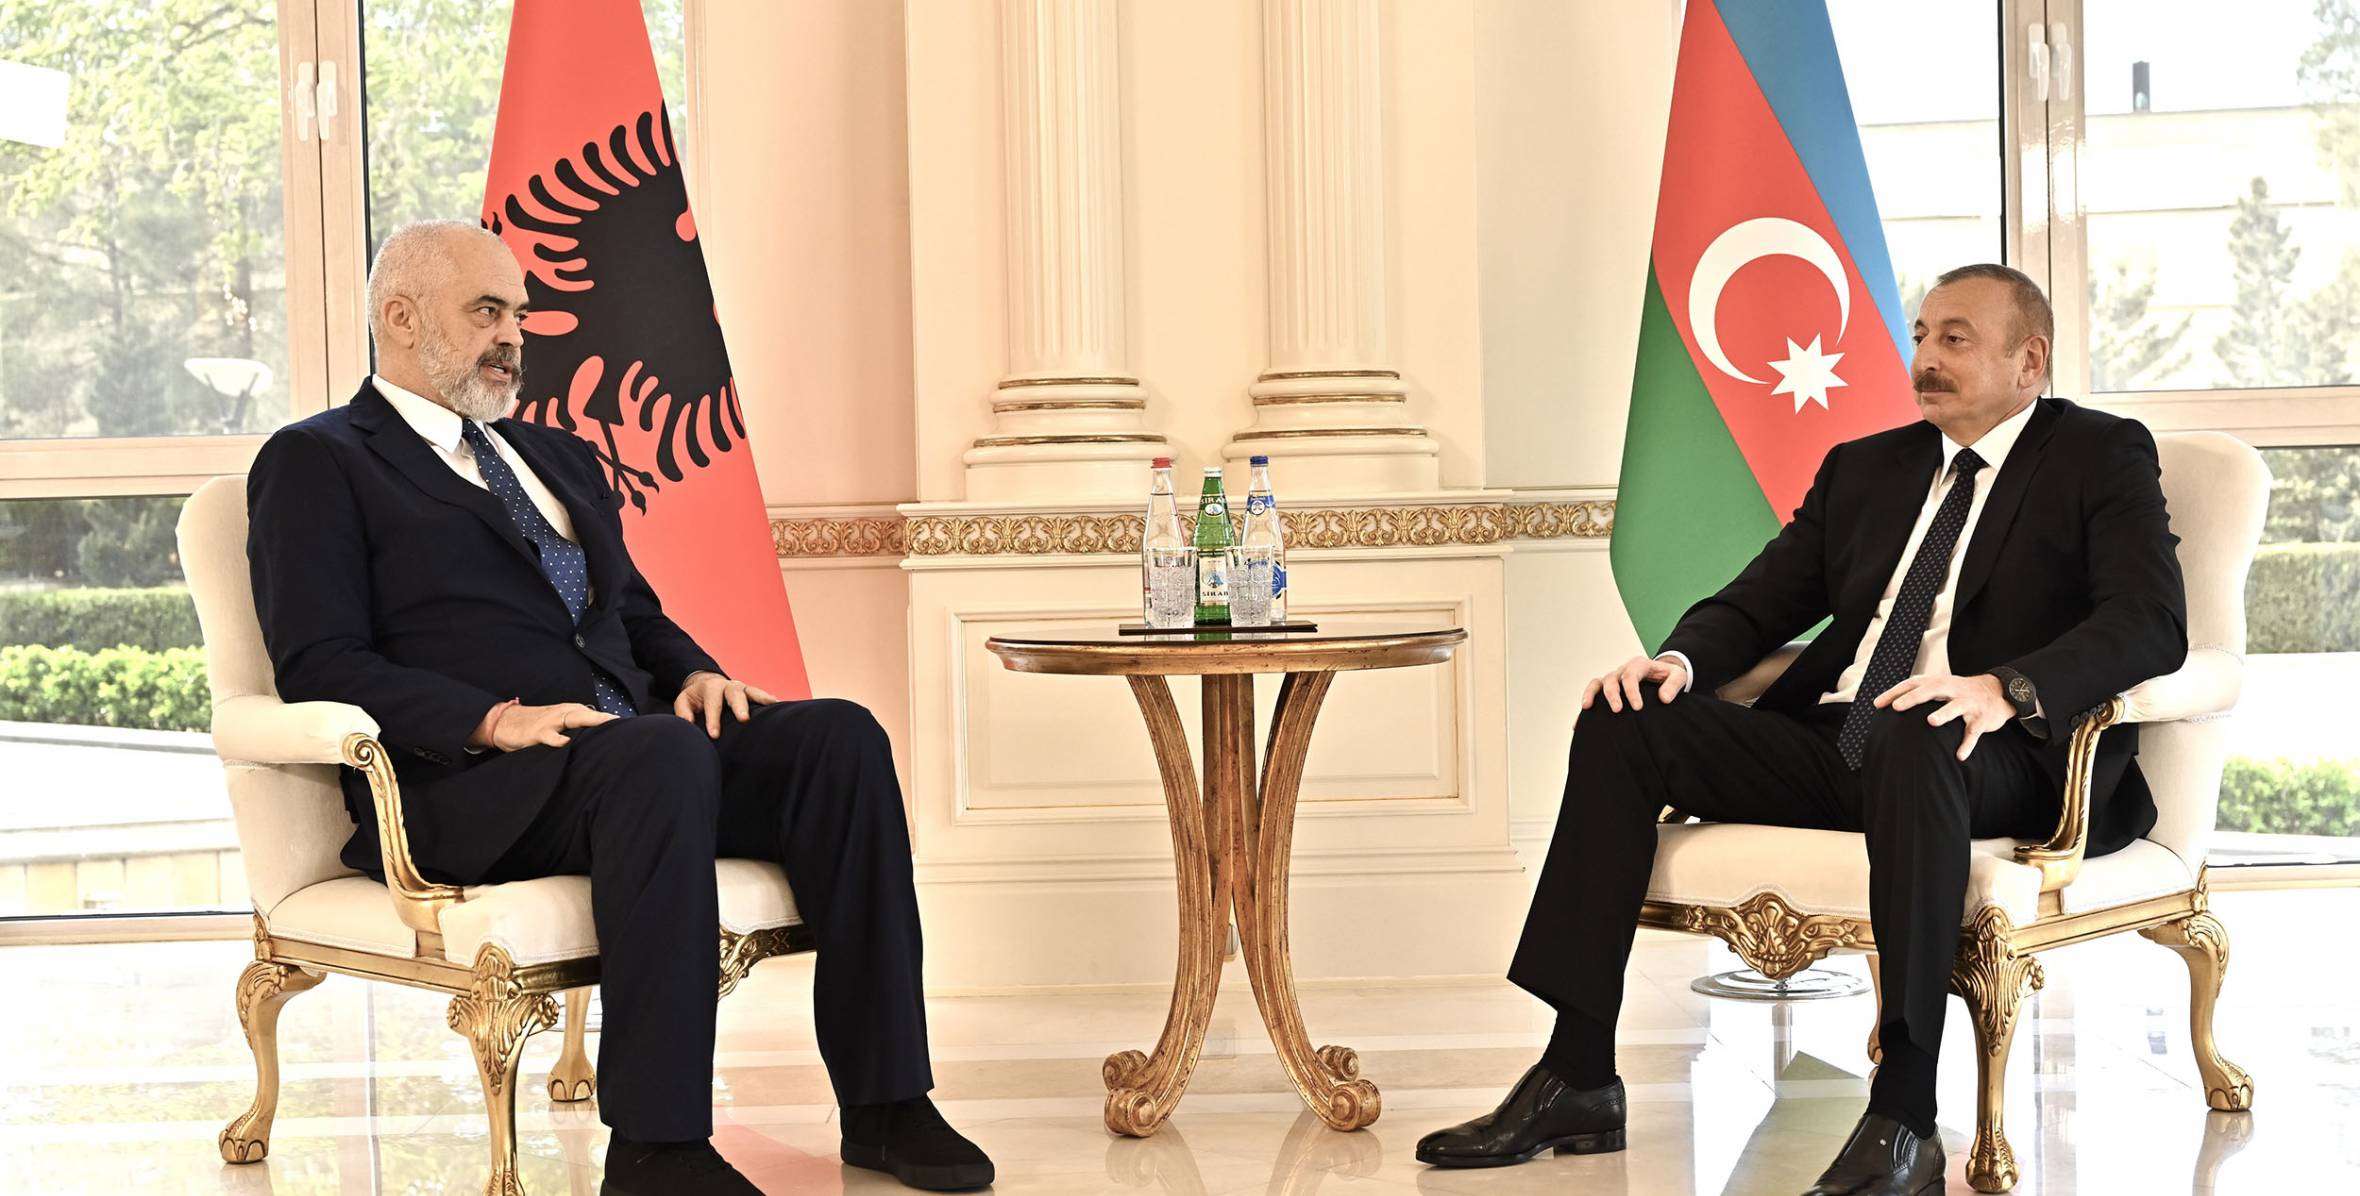 Prime Minister of Albania congratulates Ilham Aliyev on his victory in elections